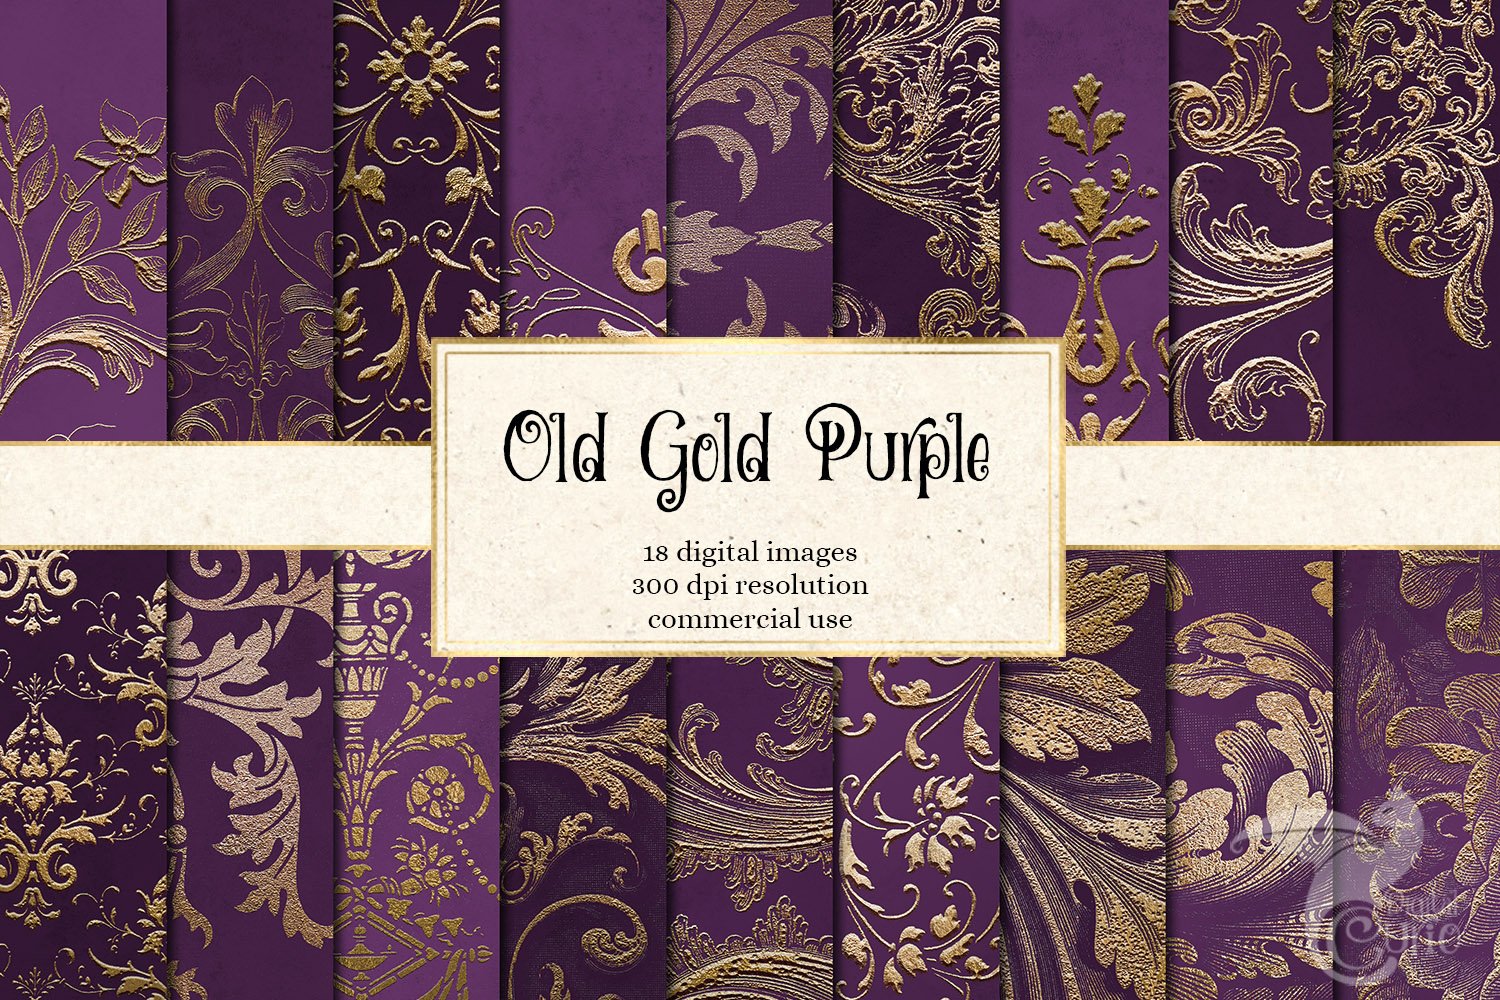 Old Gold Purple Digital Paper cover image.